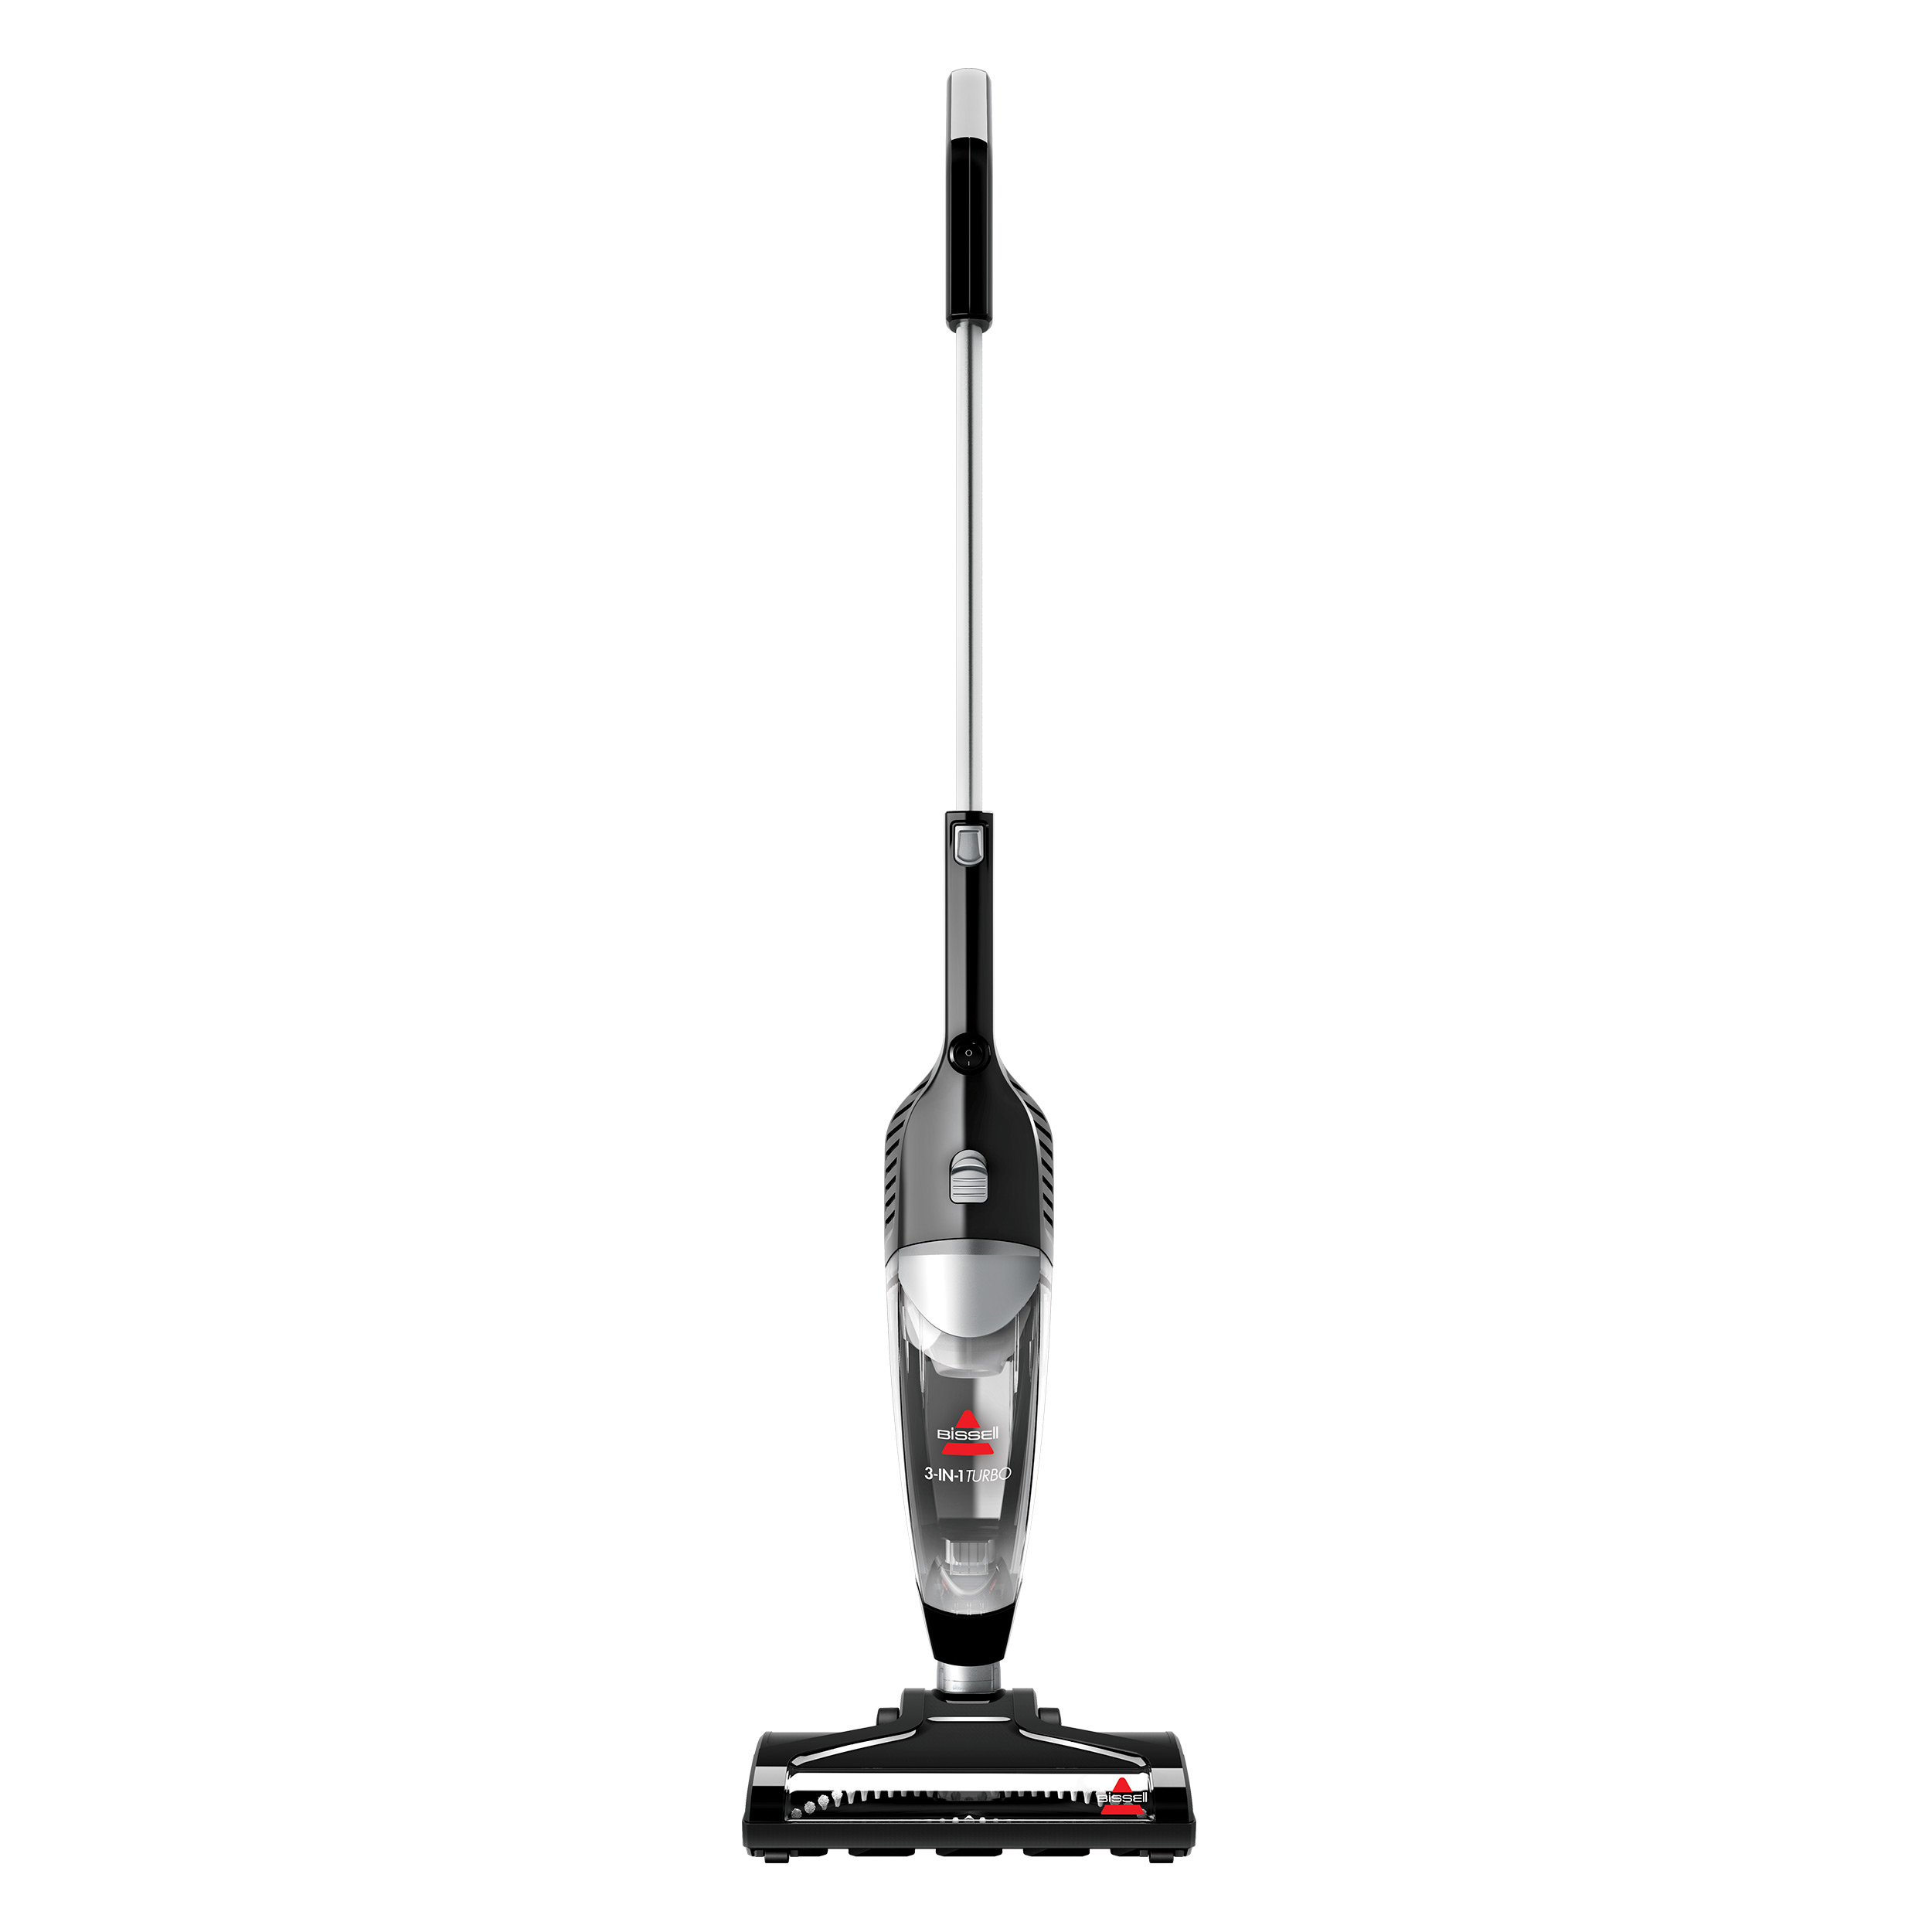 BISSELL 3-in-1 Turbo Lightweight Stick Vacuum, 2610 (Black) - image 1 of 6